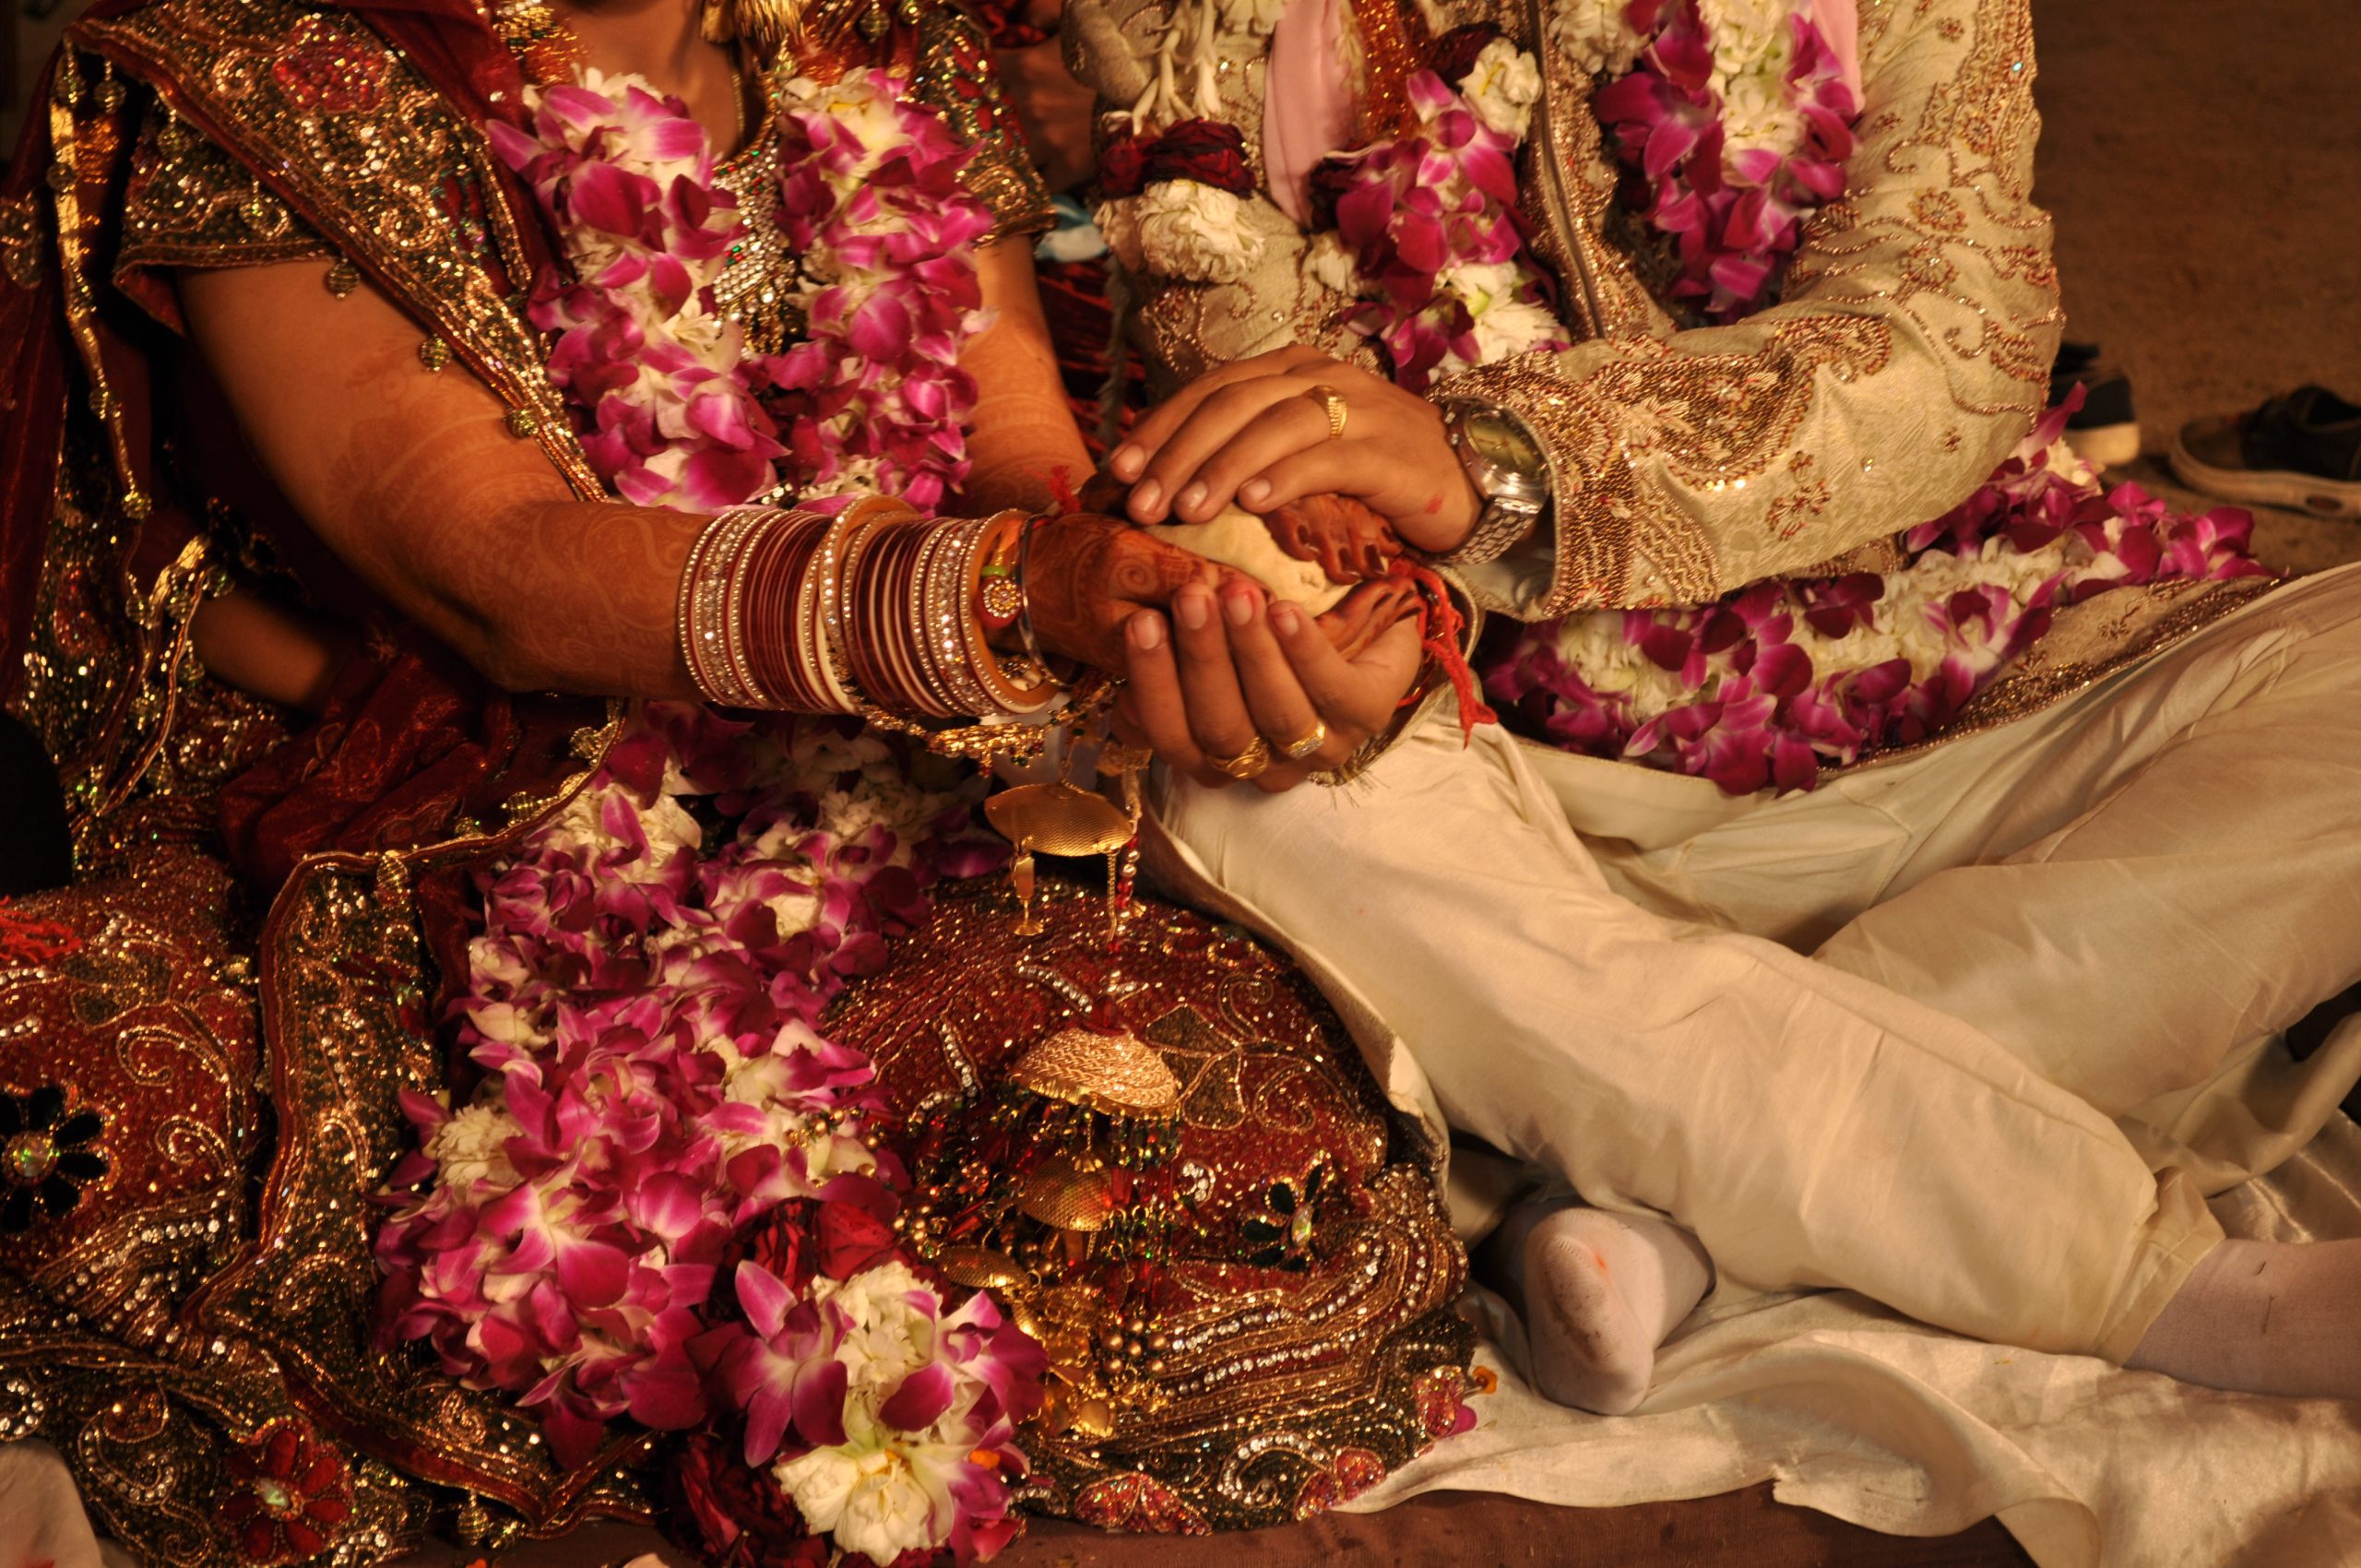 Consanguineous marriages are defined as marriage between people who are blood relatives. (Creative Commons)